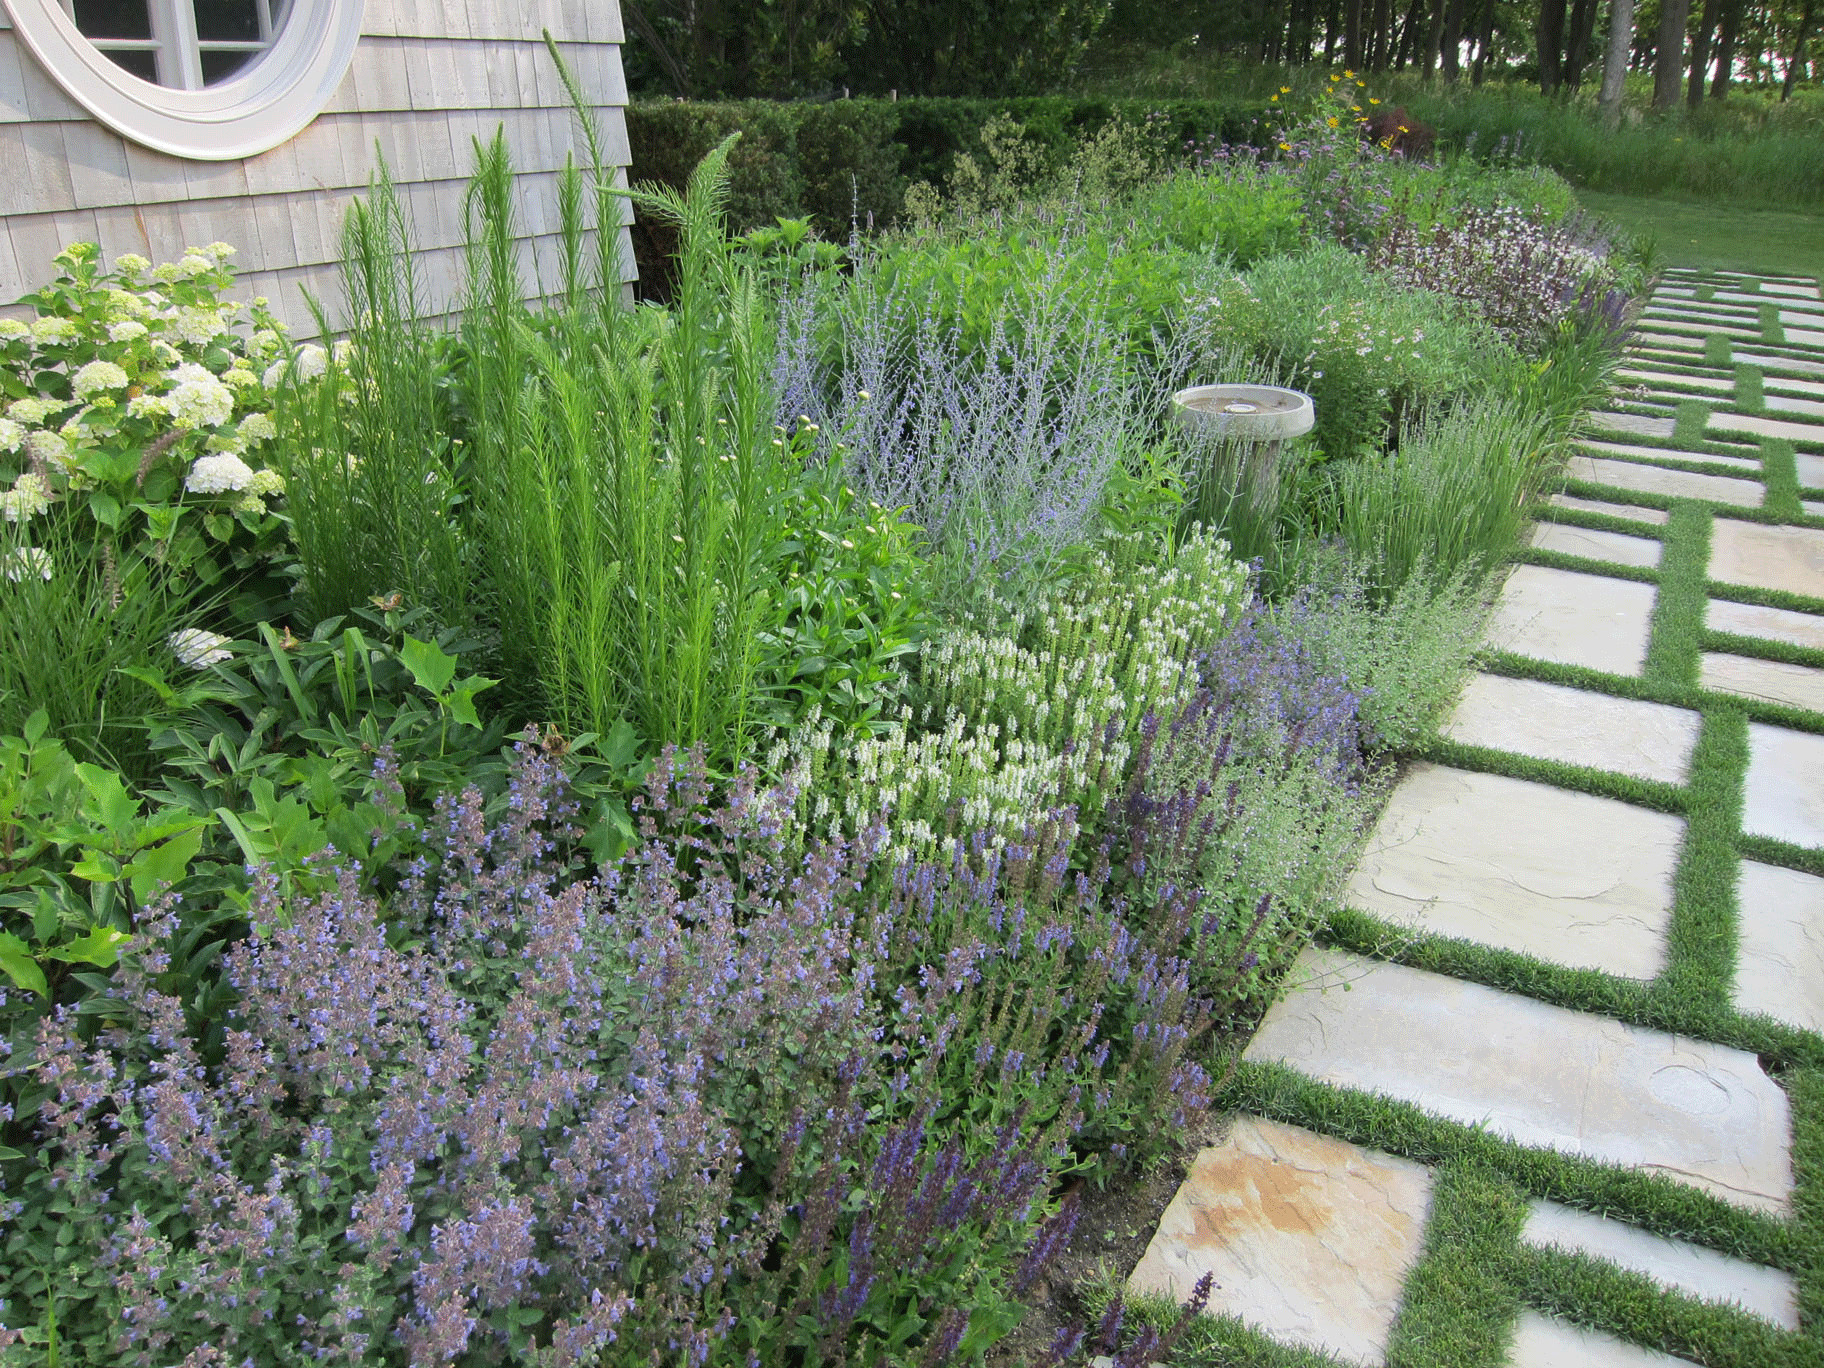 The Herb Garden and Stone Walkway that is random by Peter Atkins